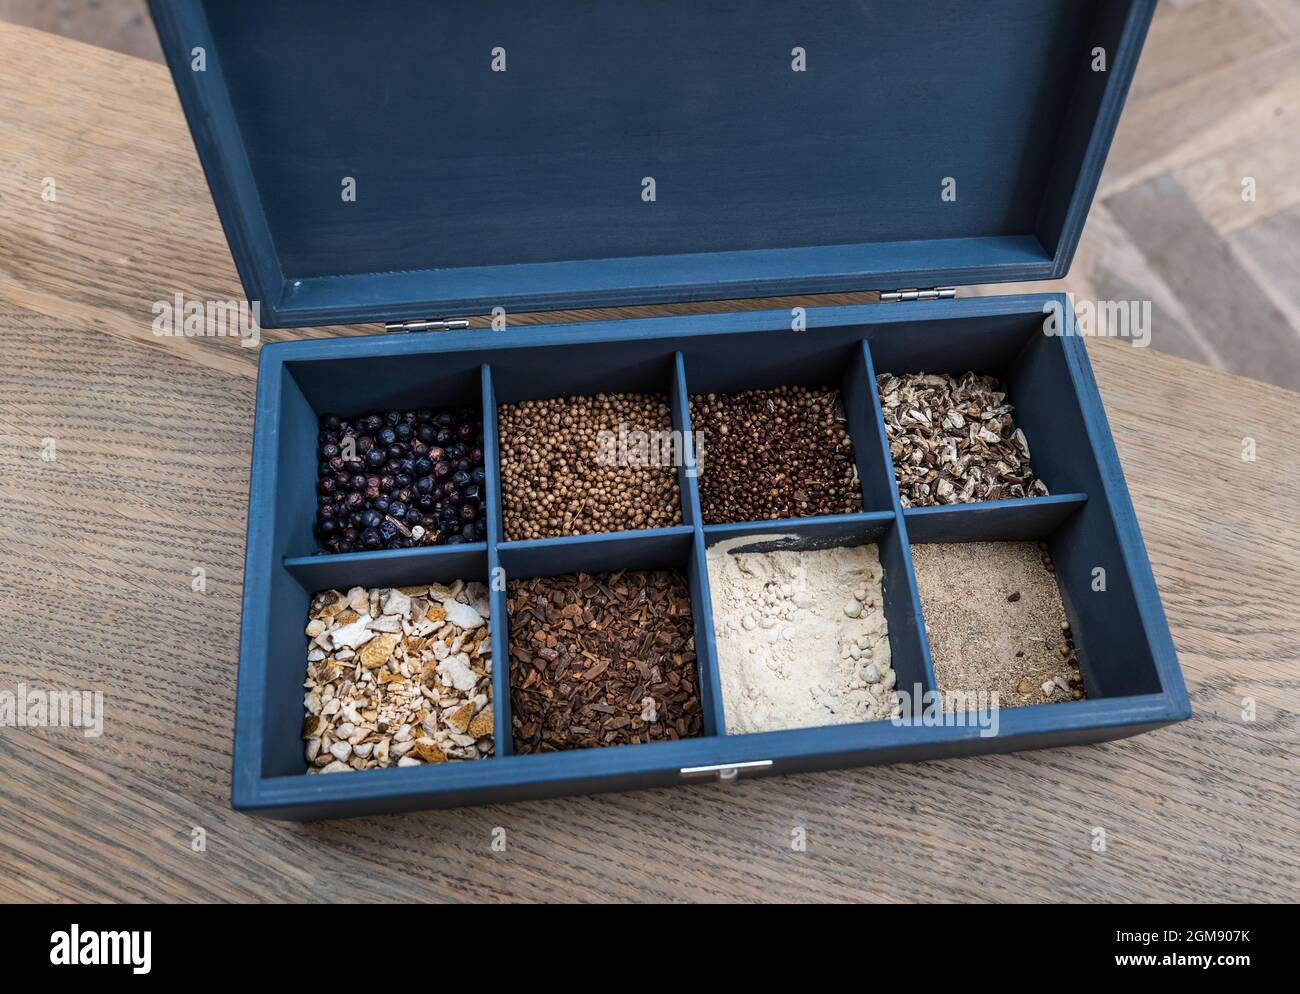 Gin botanicals and spices: juniper berries, coriander seeds, grains of paradise, angelica root, lemon peel, cassia bark, cardamom and orris root Stock Photo